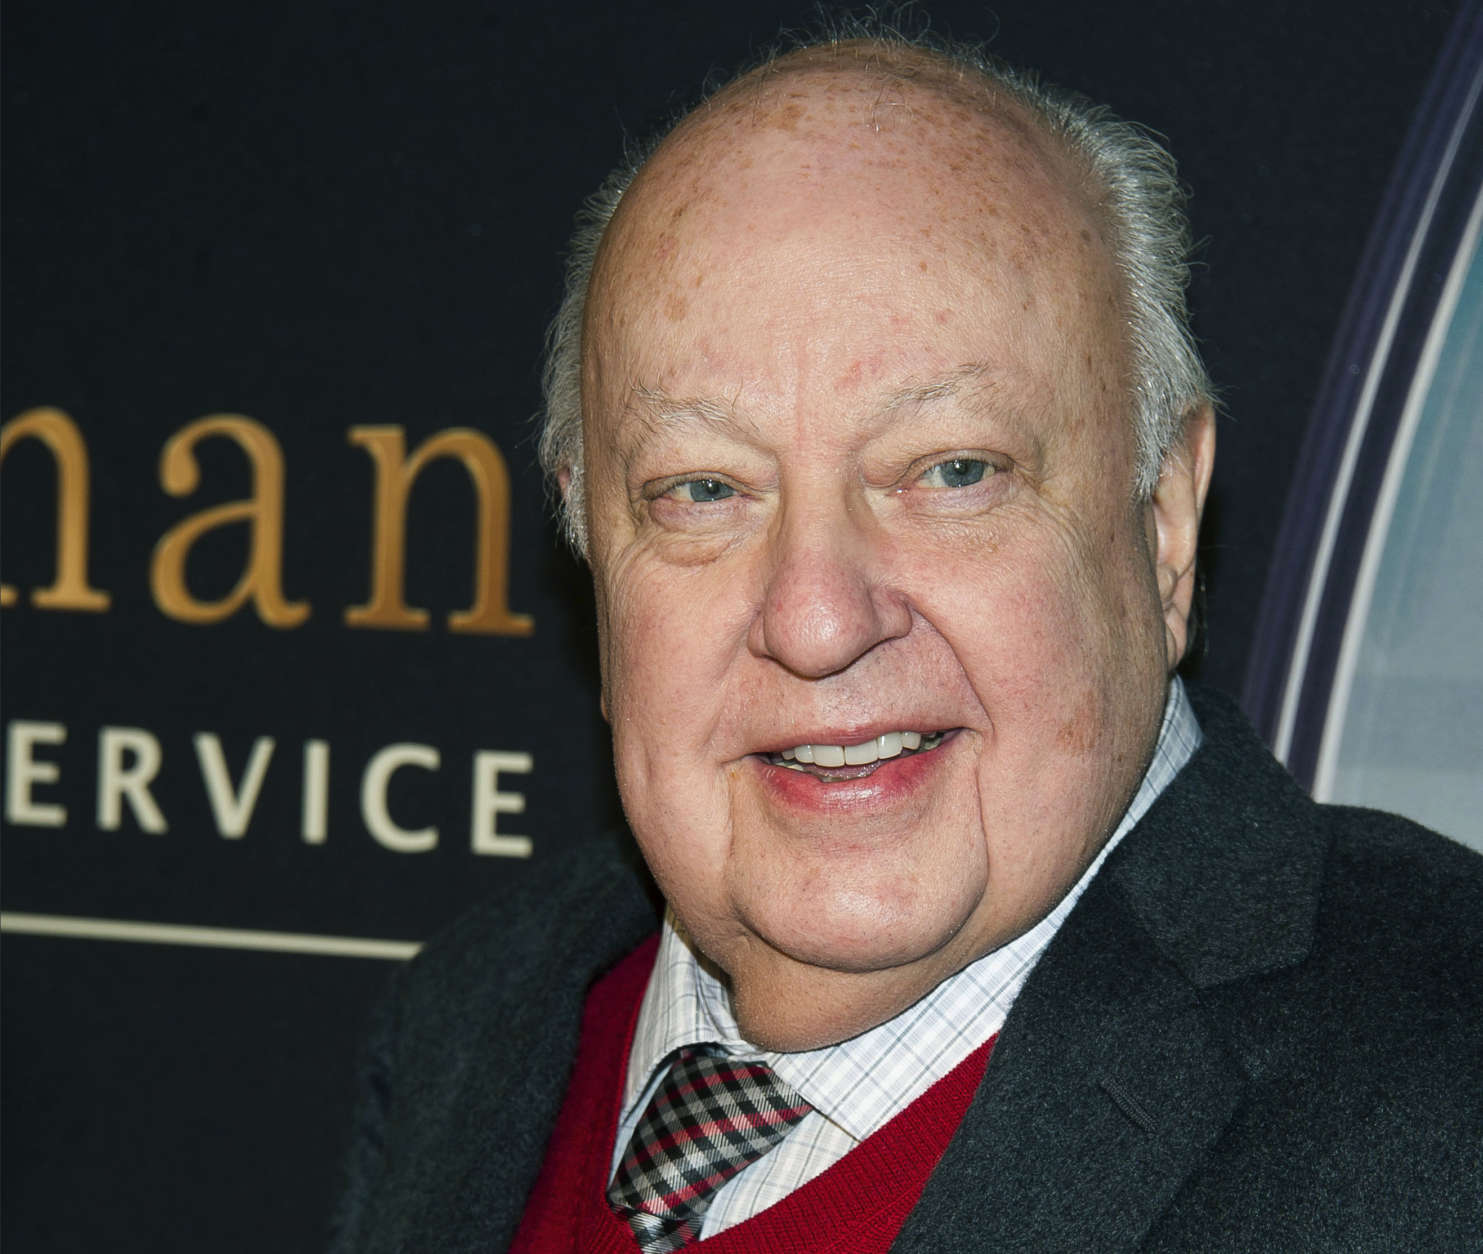 FILE - In this Feb. 9, 2015, file photo, Roger Ailes attends a special screening of "Kingsman: The Secret Service" in New York. (Photo by Charles Sykes/Invision/AP, File)